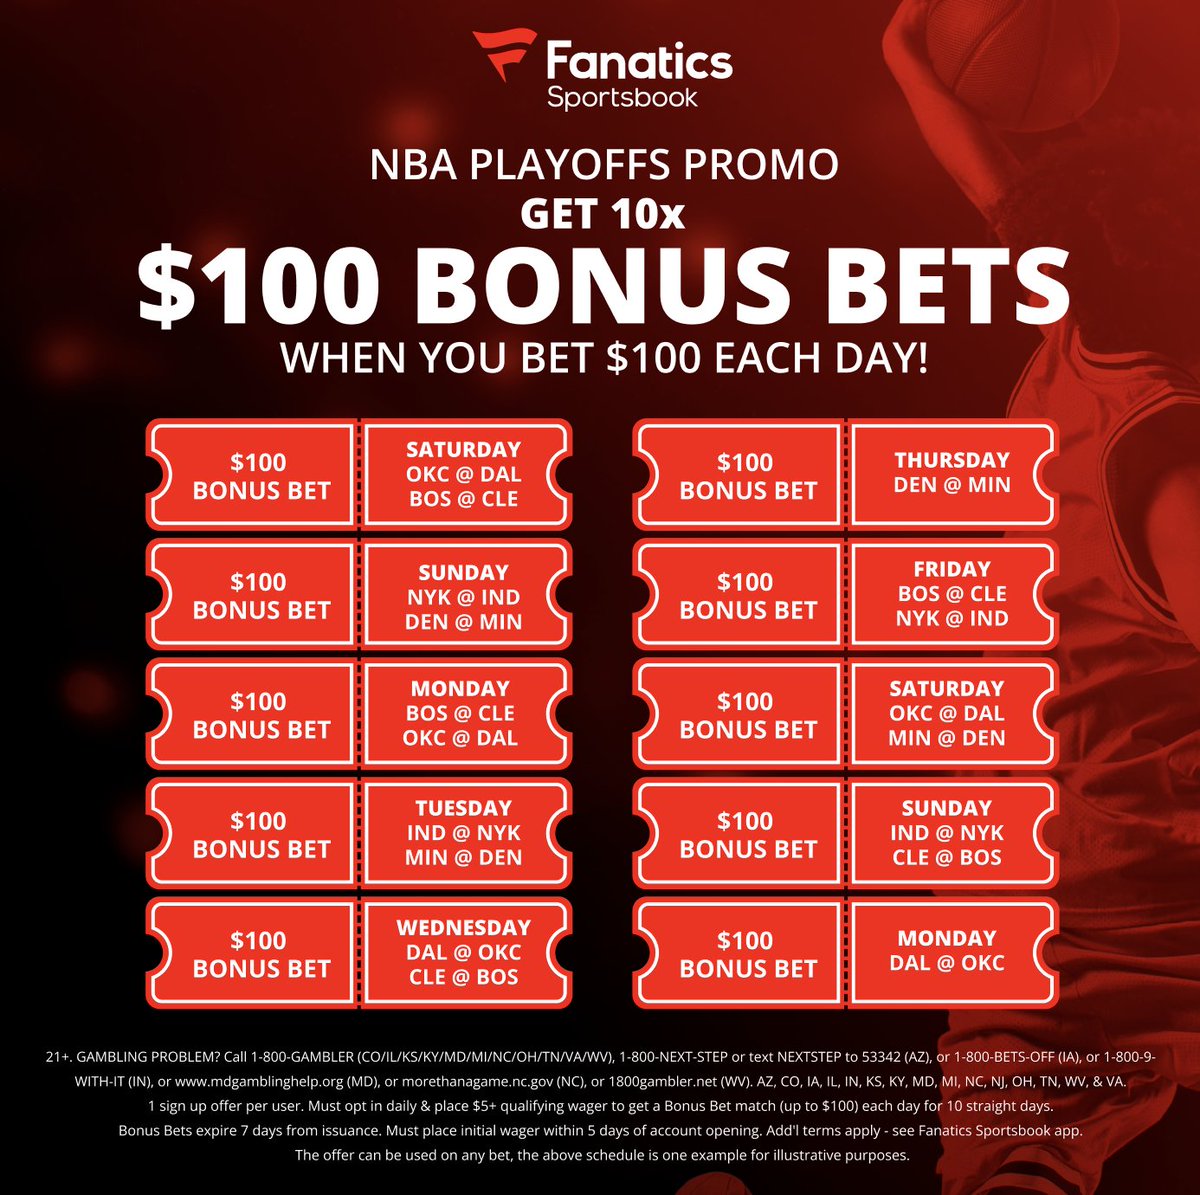 🤑 10 DAYS OF BONUSES 🤑 Get a $100 bonus bet for TEN days in a row on Fanatics. CLAIM HERE: flashpicks.bet/Fanatics-5Doll… When you join today it covers the next TEN days of NBA Playoffs ✅